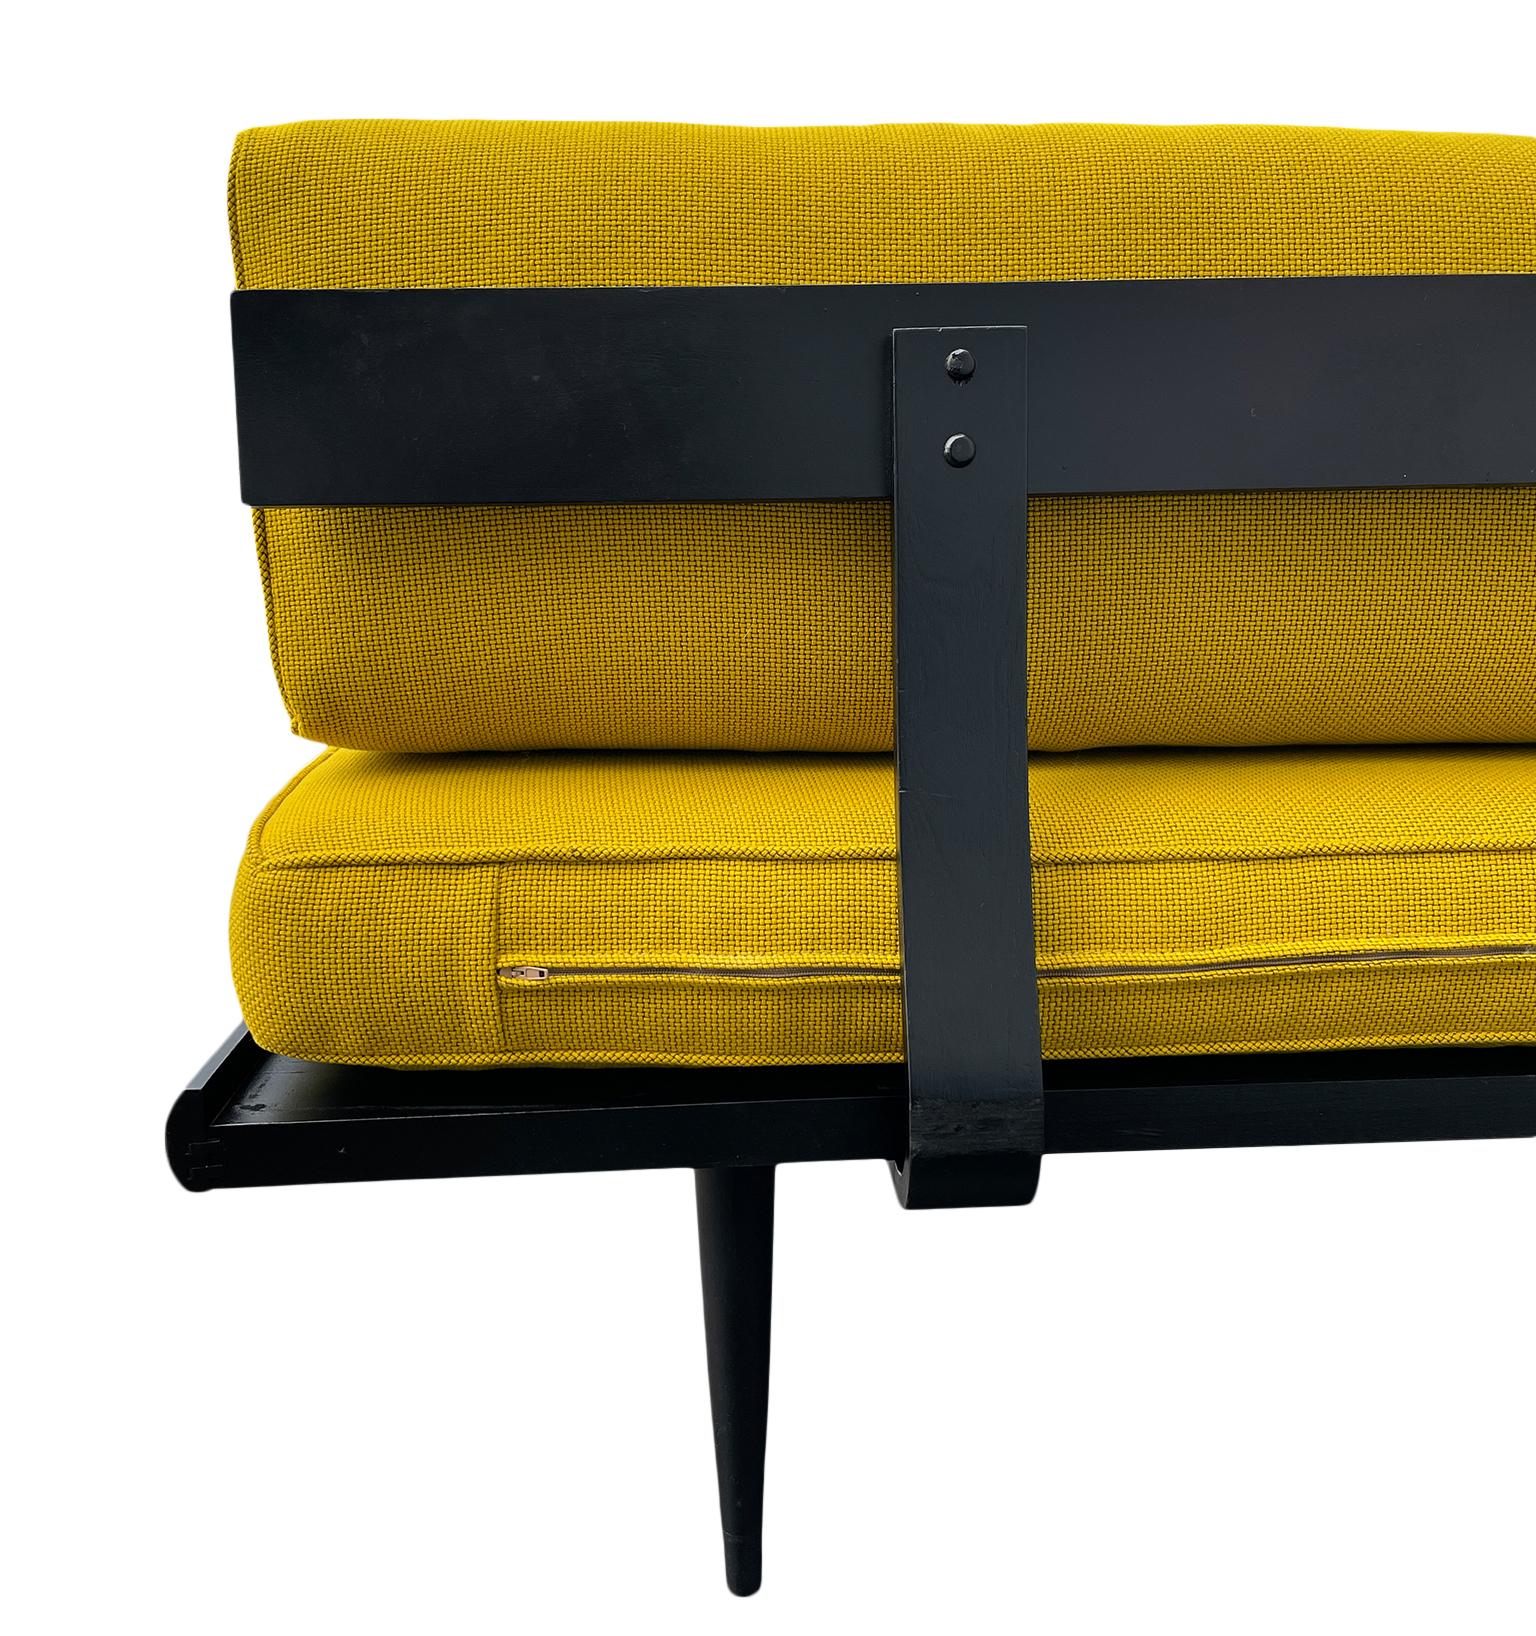 Woodwork Mid-Century Modern Low Daybed Black Lacquer Frame and Mustard Yellow Cushions